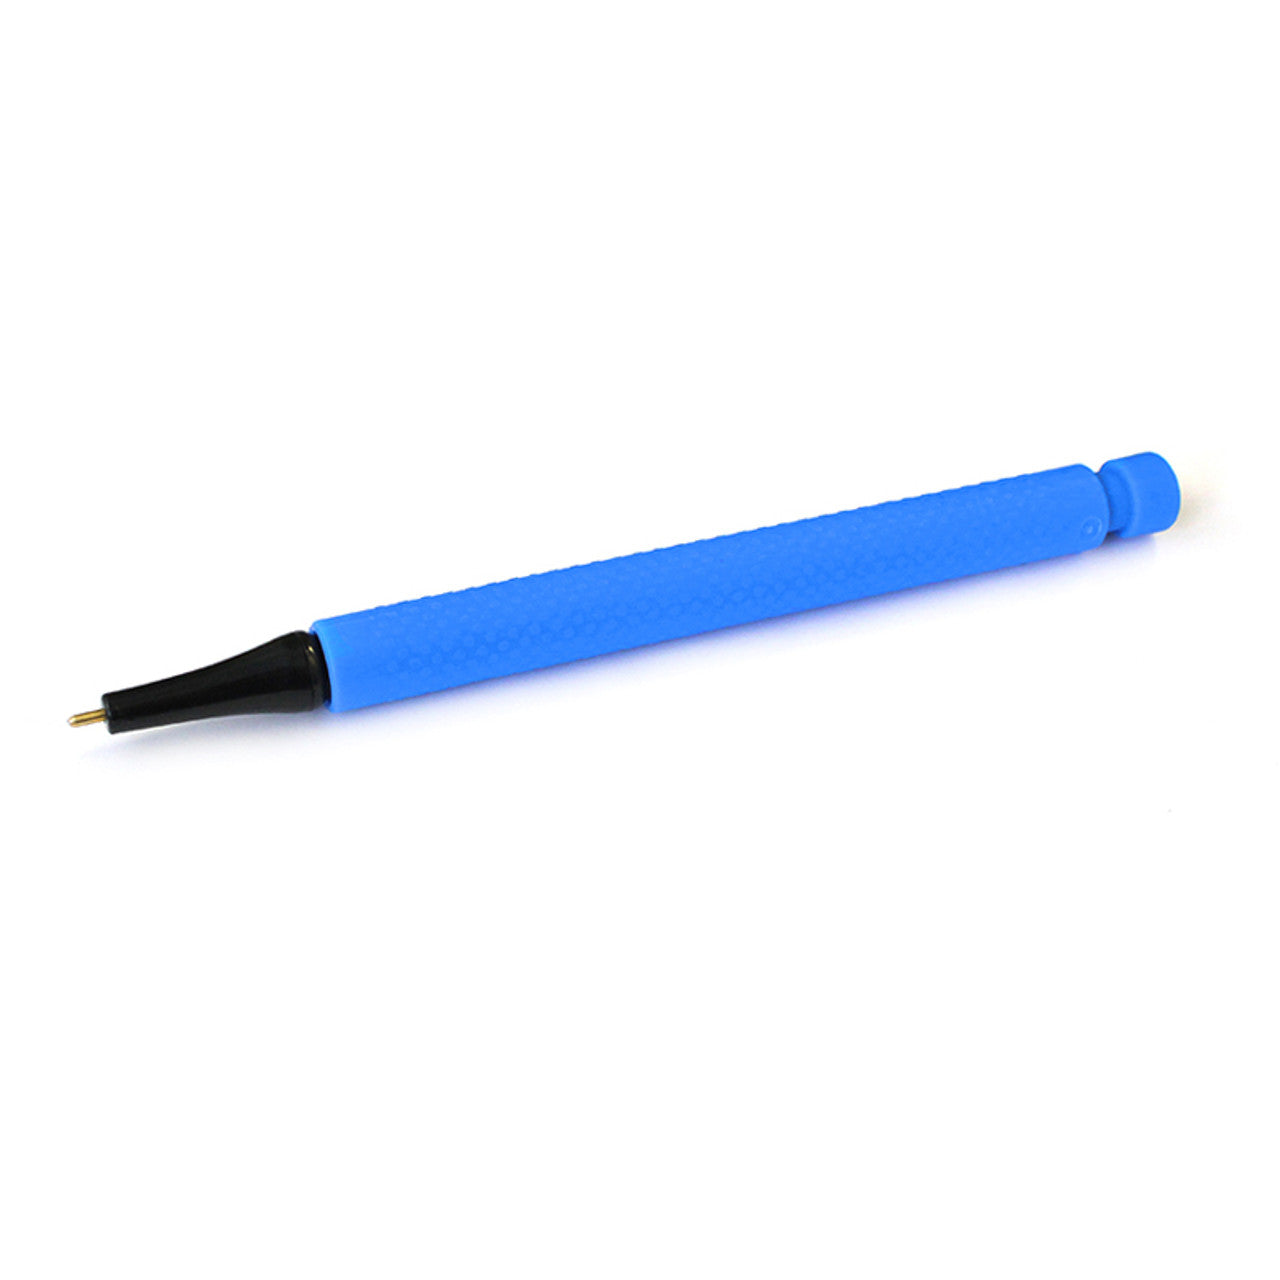 ARK's Adjustable Weighted Pencil Set